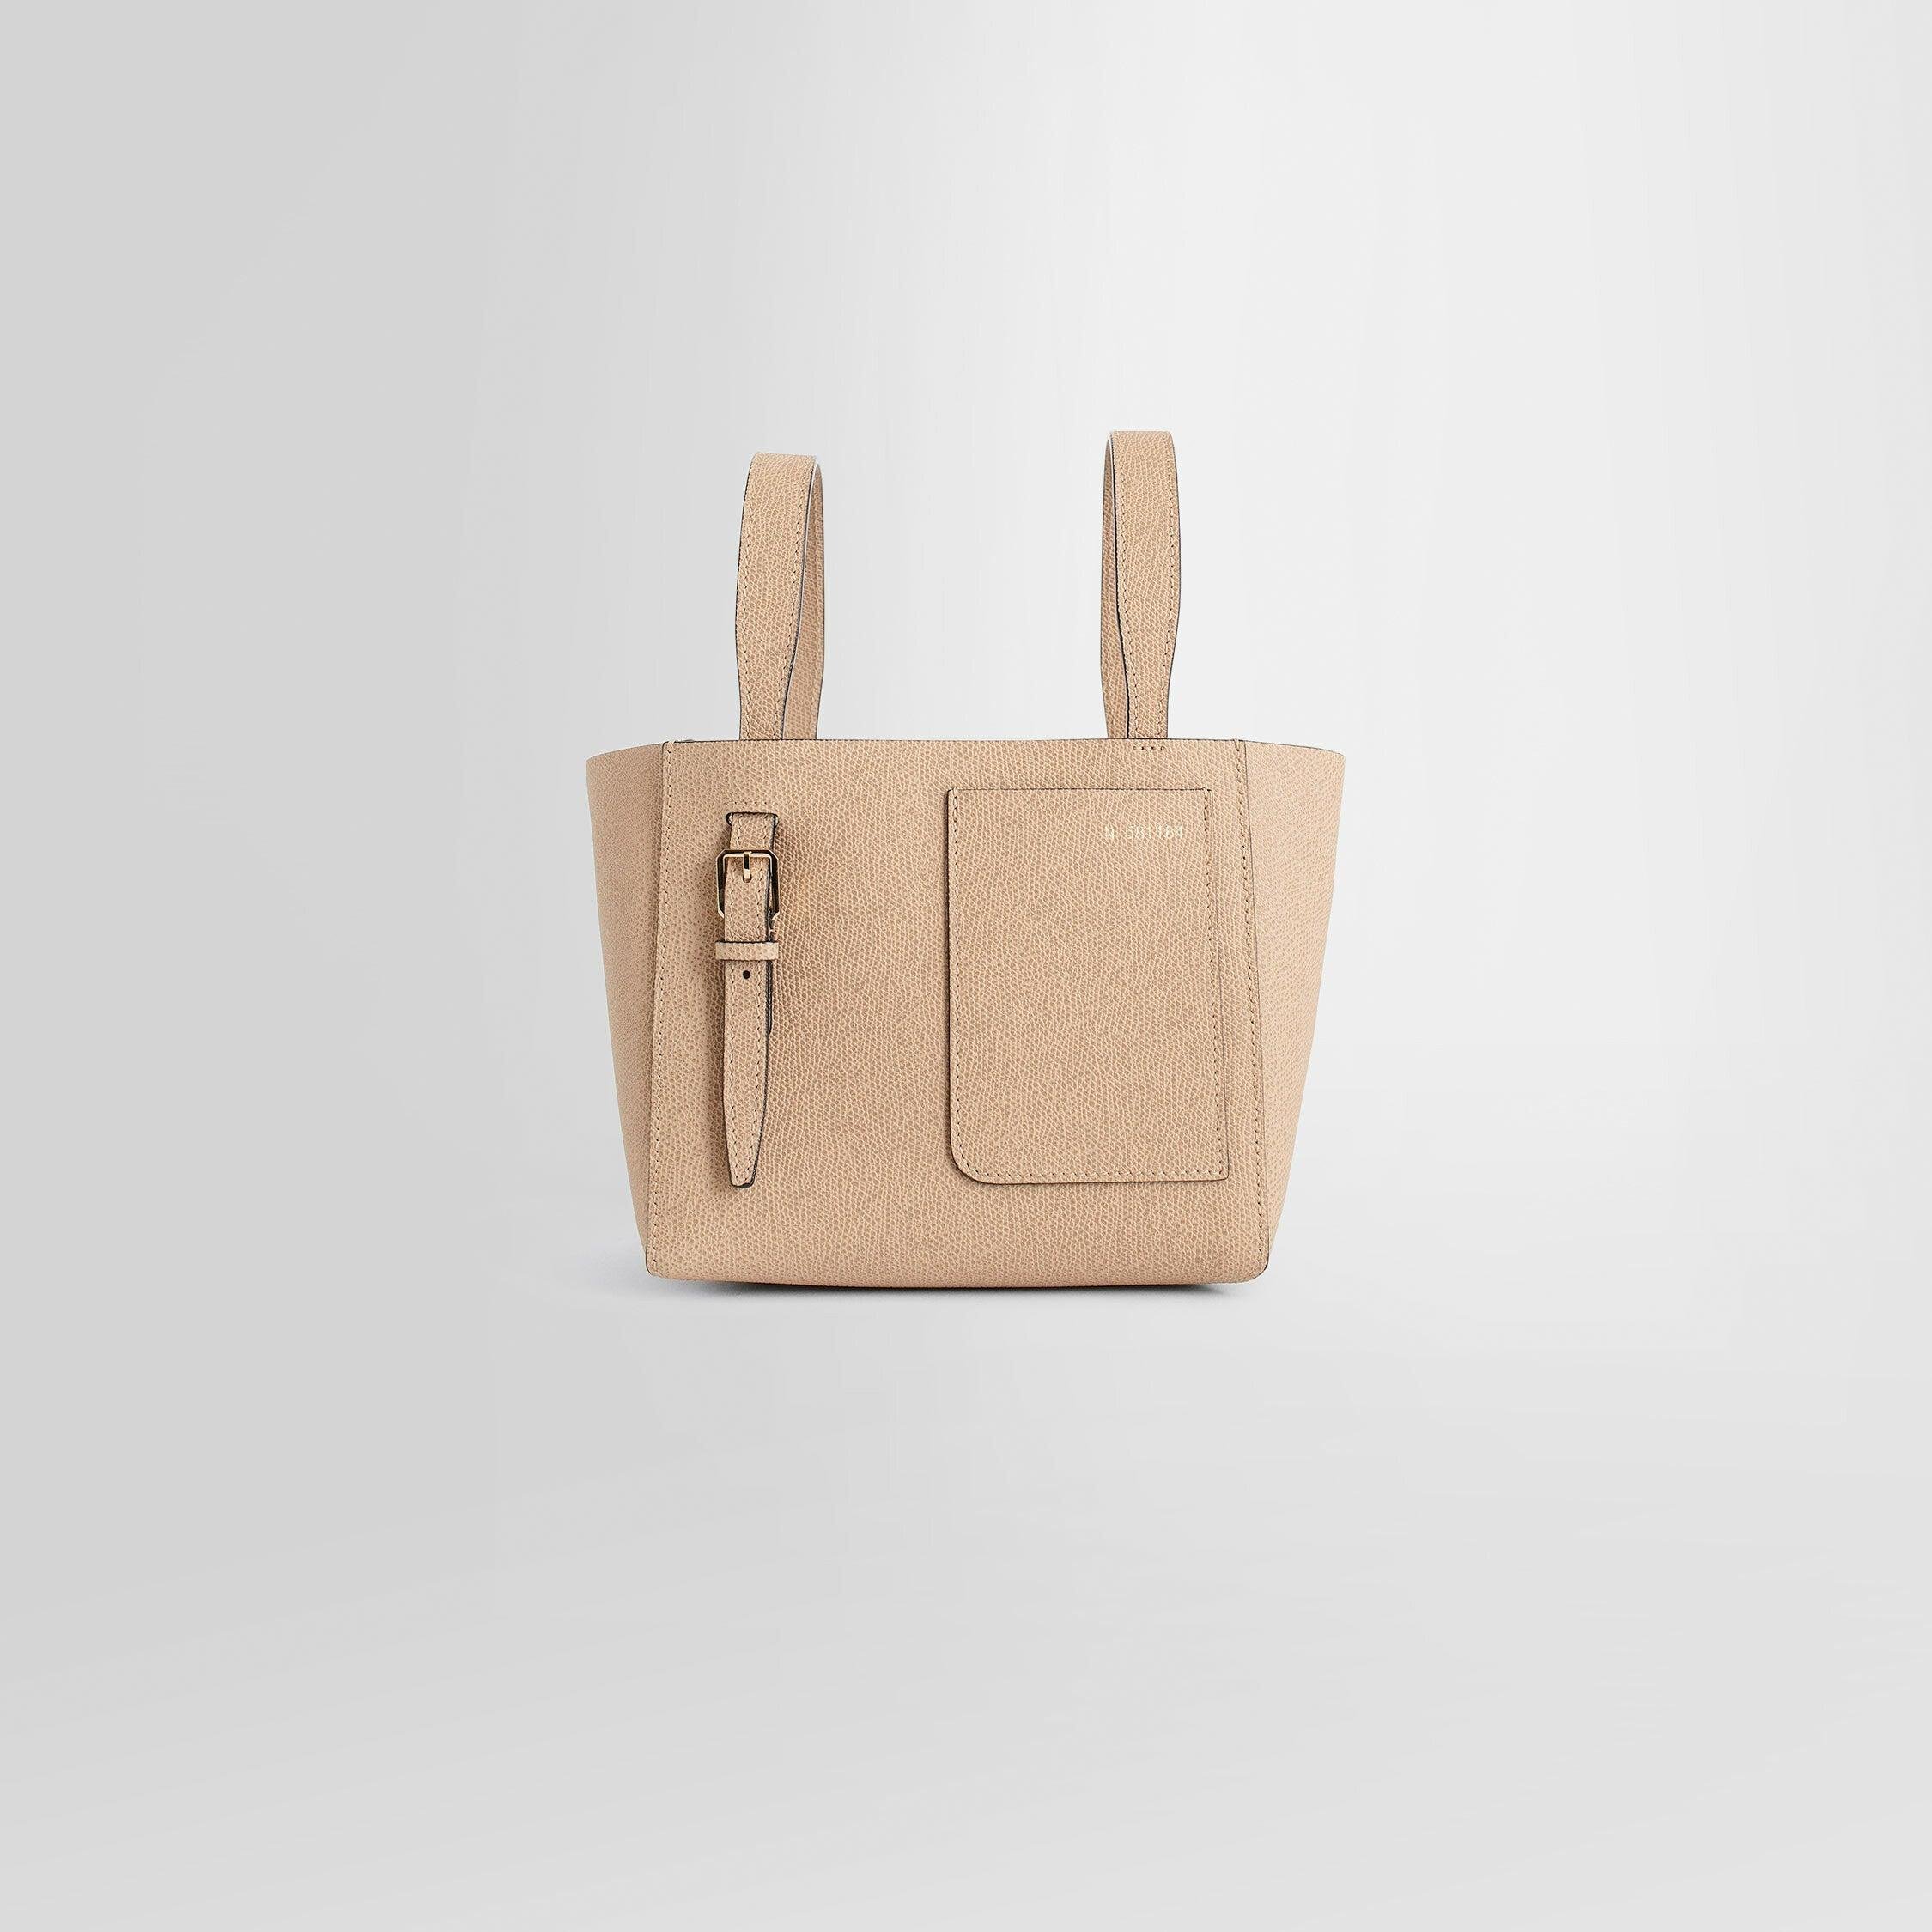 VALEXTRA WOMAN BEIGE TOP HANDLE BAGS by VALEXTRA